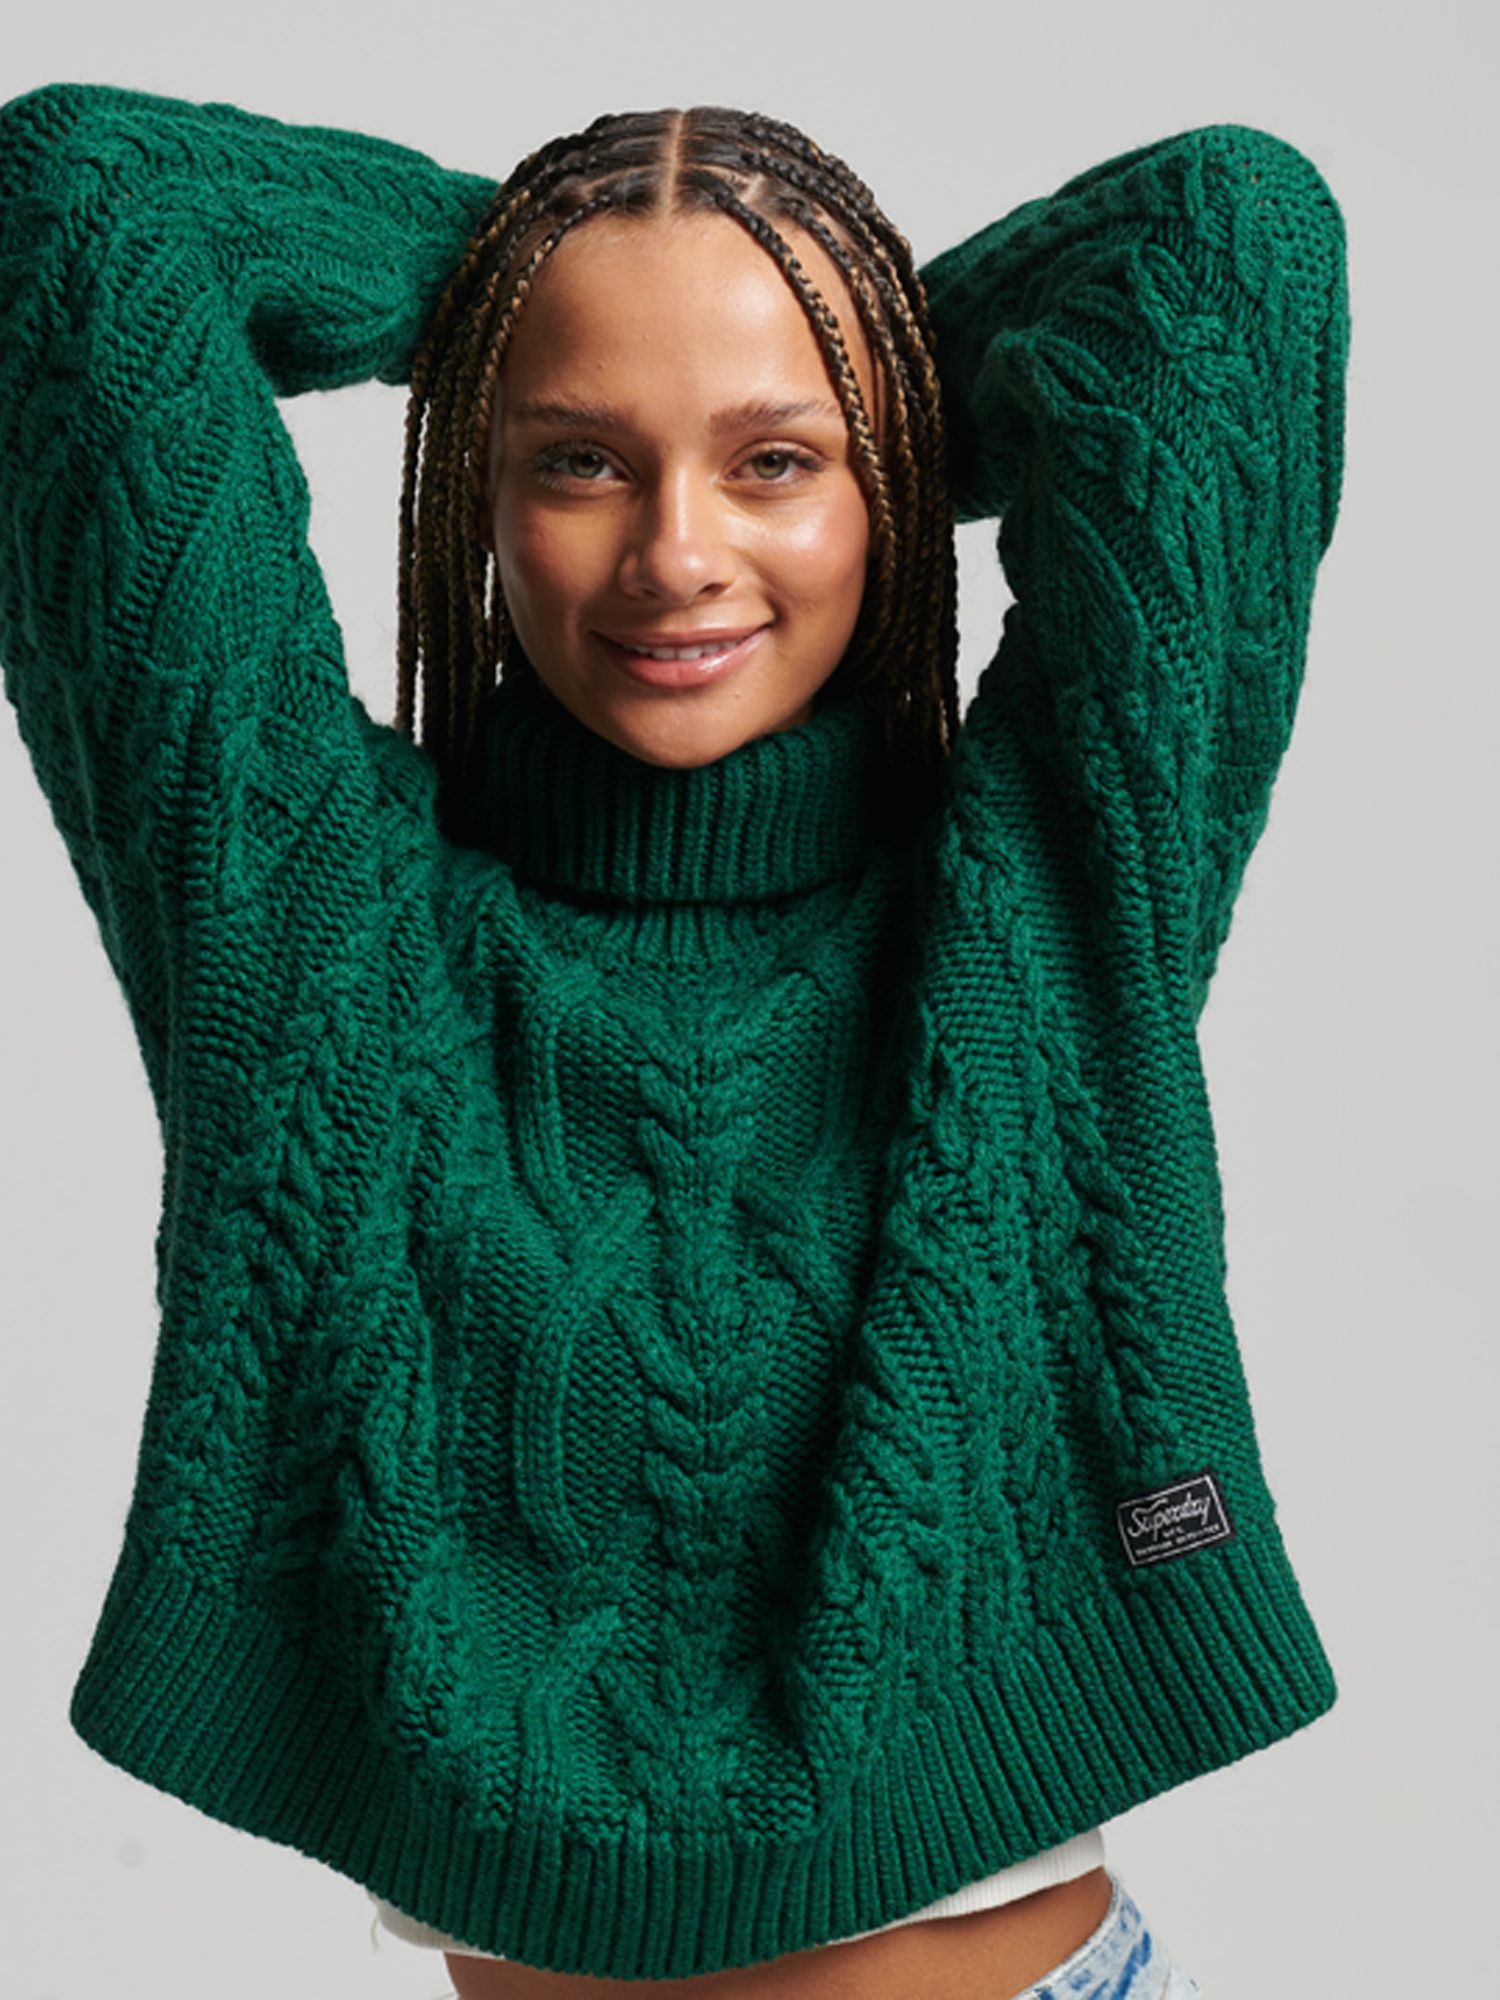 Women's Cable Knit Polo Neck Jumper in Pine Green